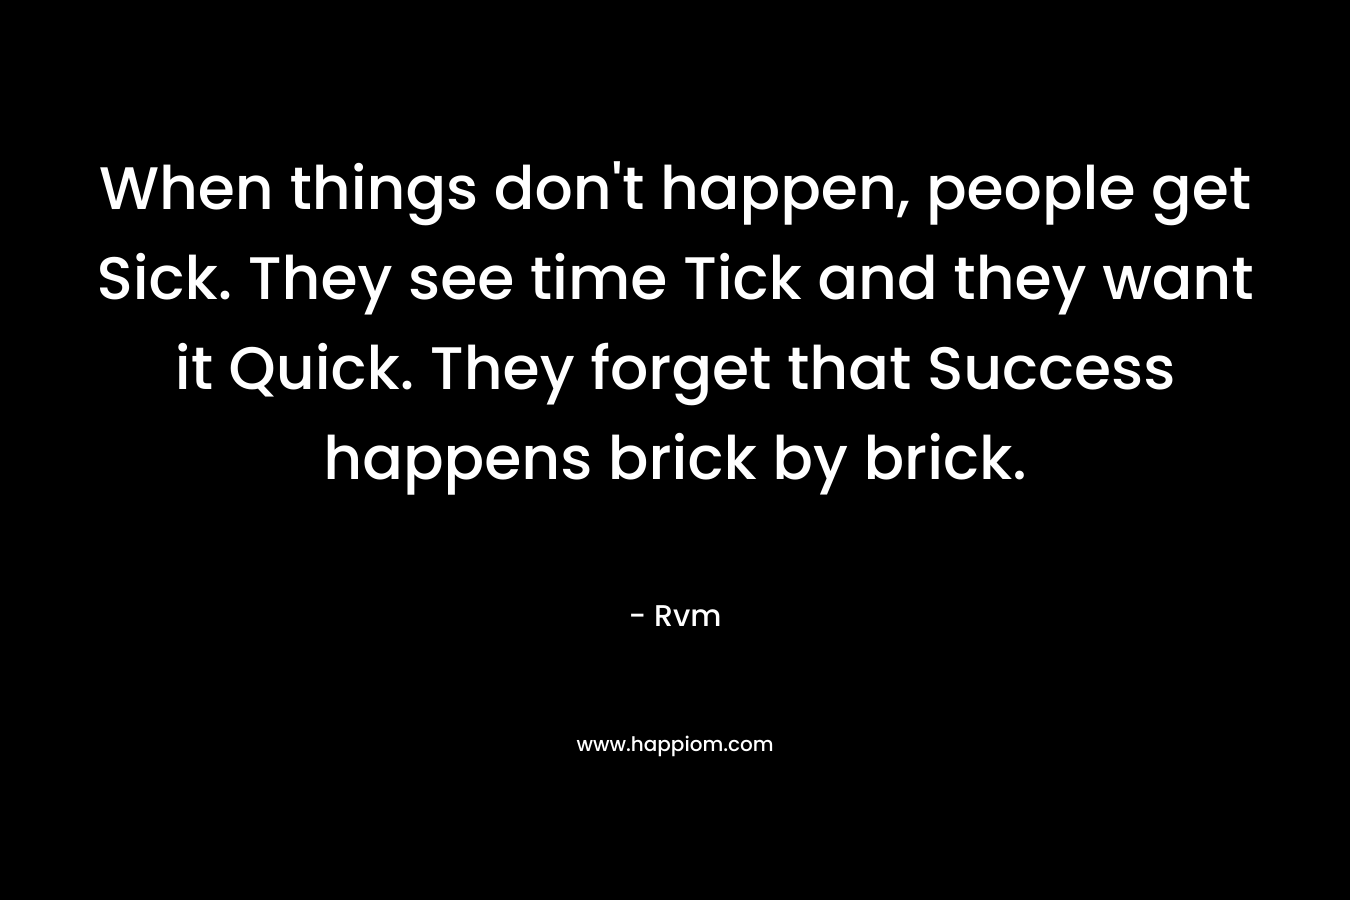 When things don’t happen, people get Sick. They see time Tick and they want it Quick. They forget that Success happens brick by brick. – Rvm